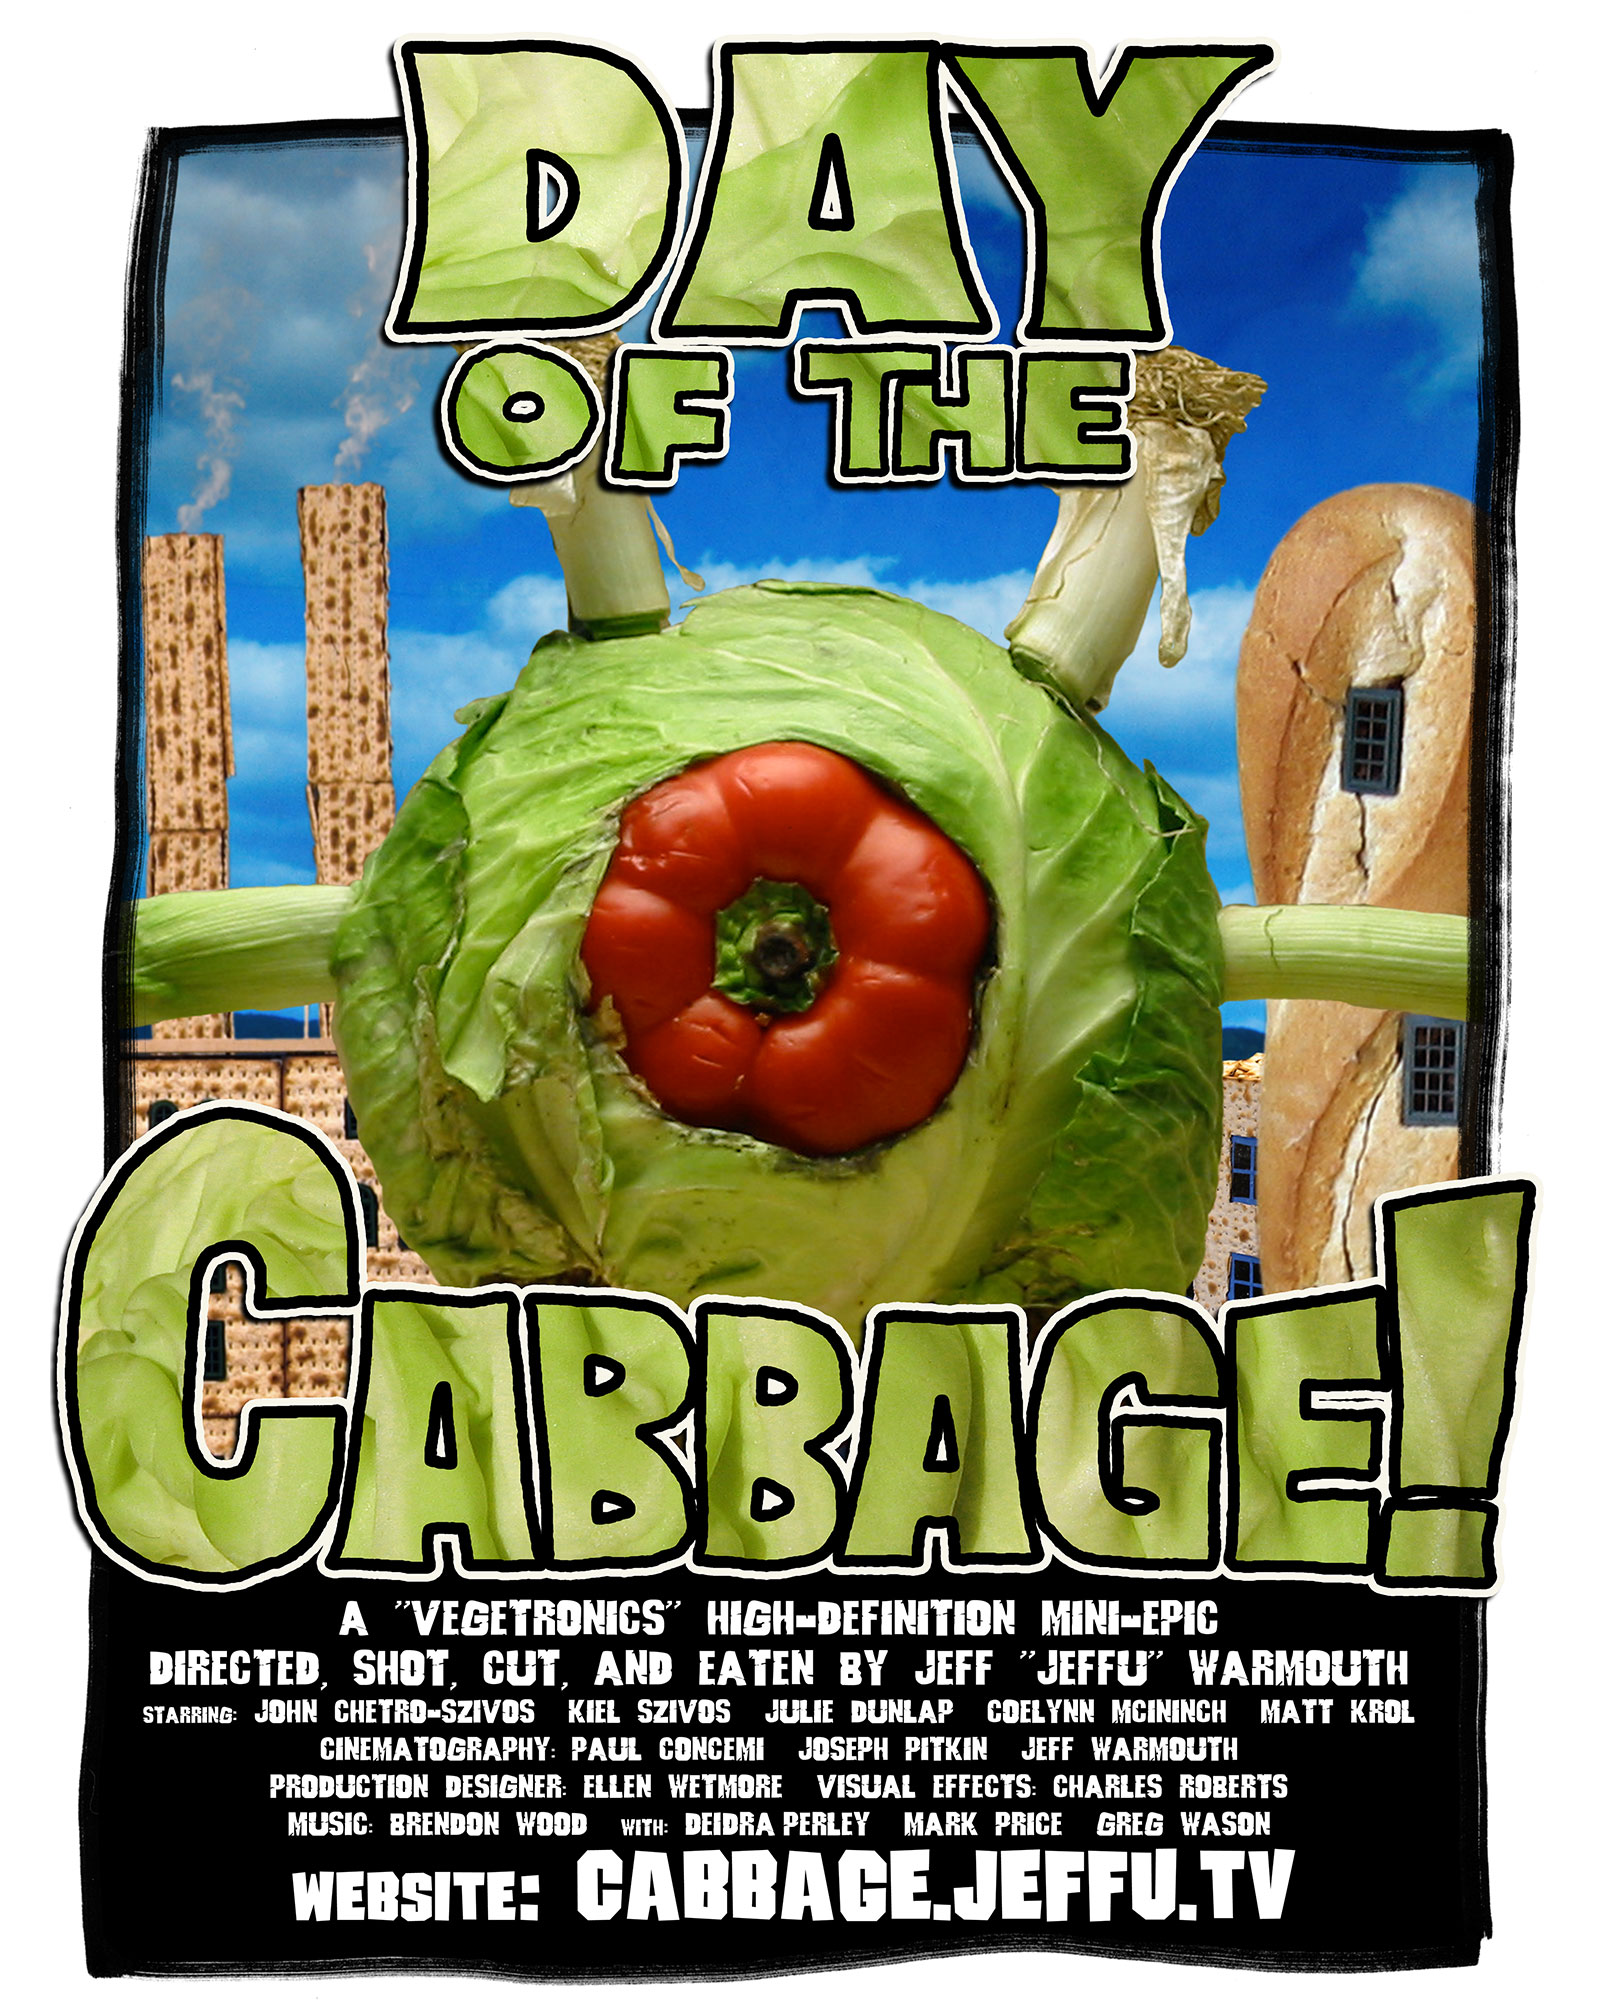 Day of the Cabbage Poster